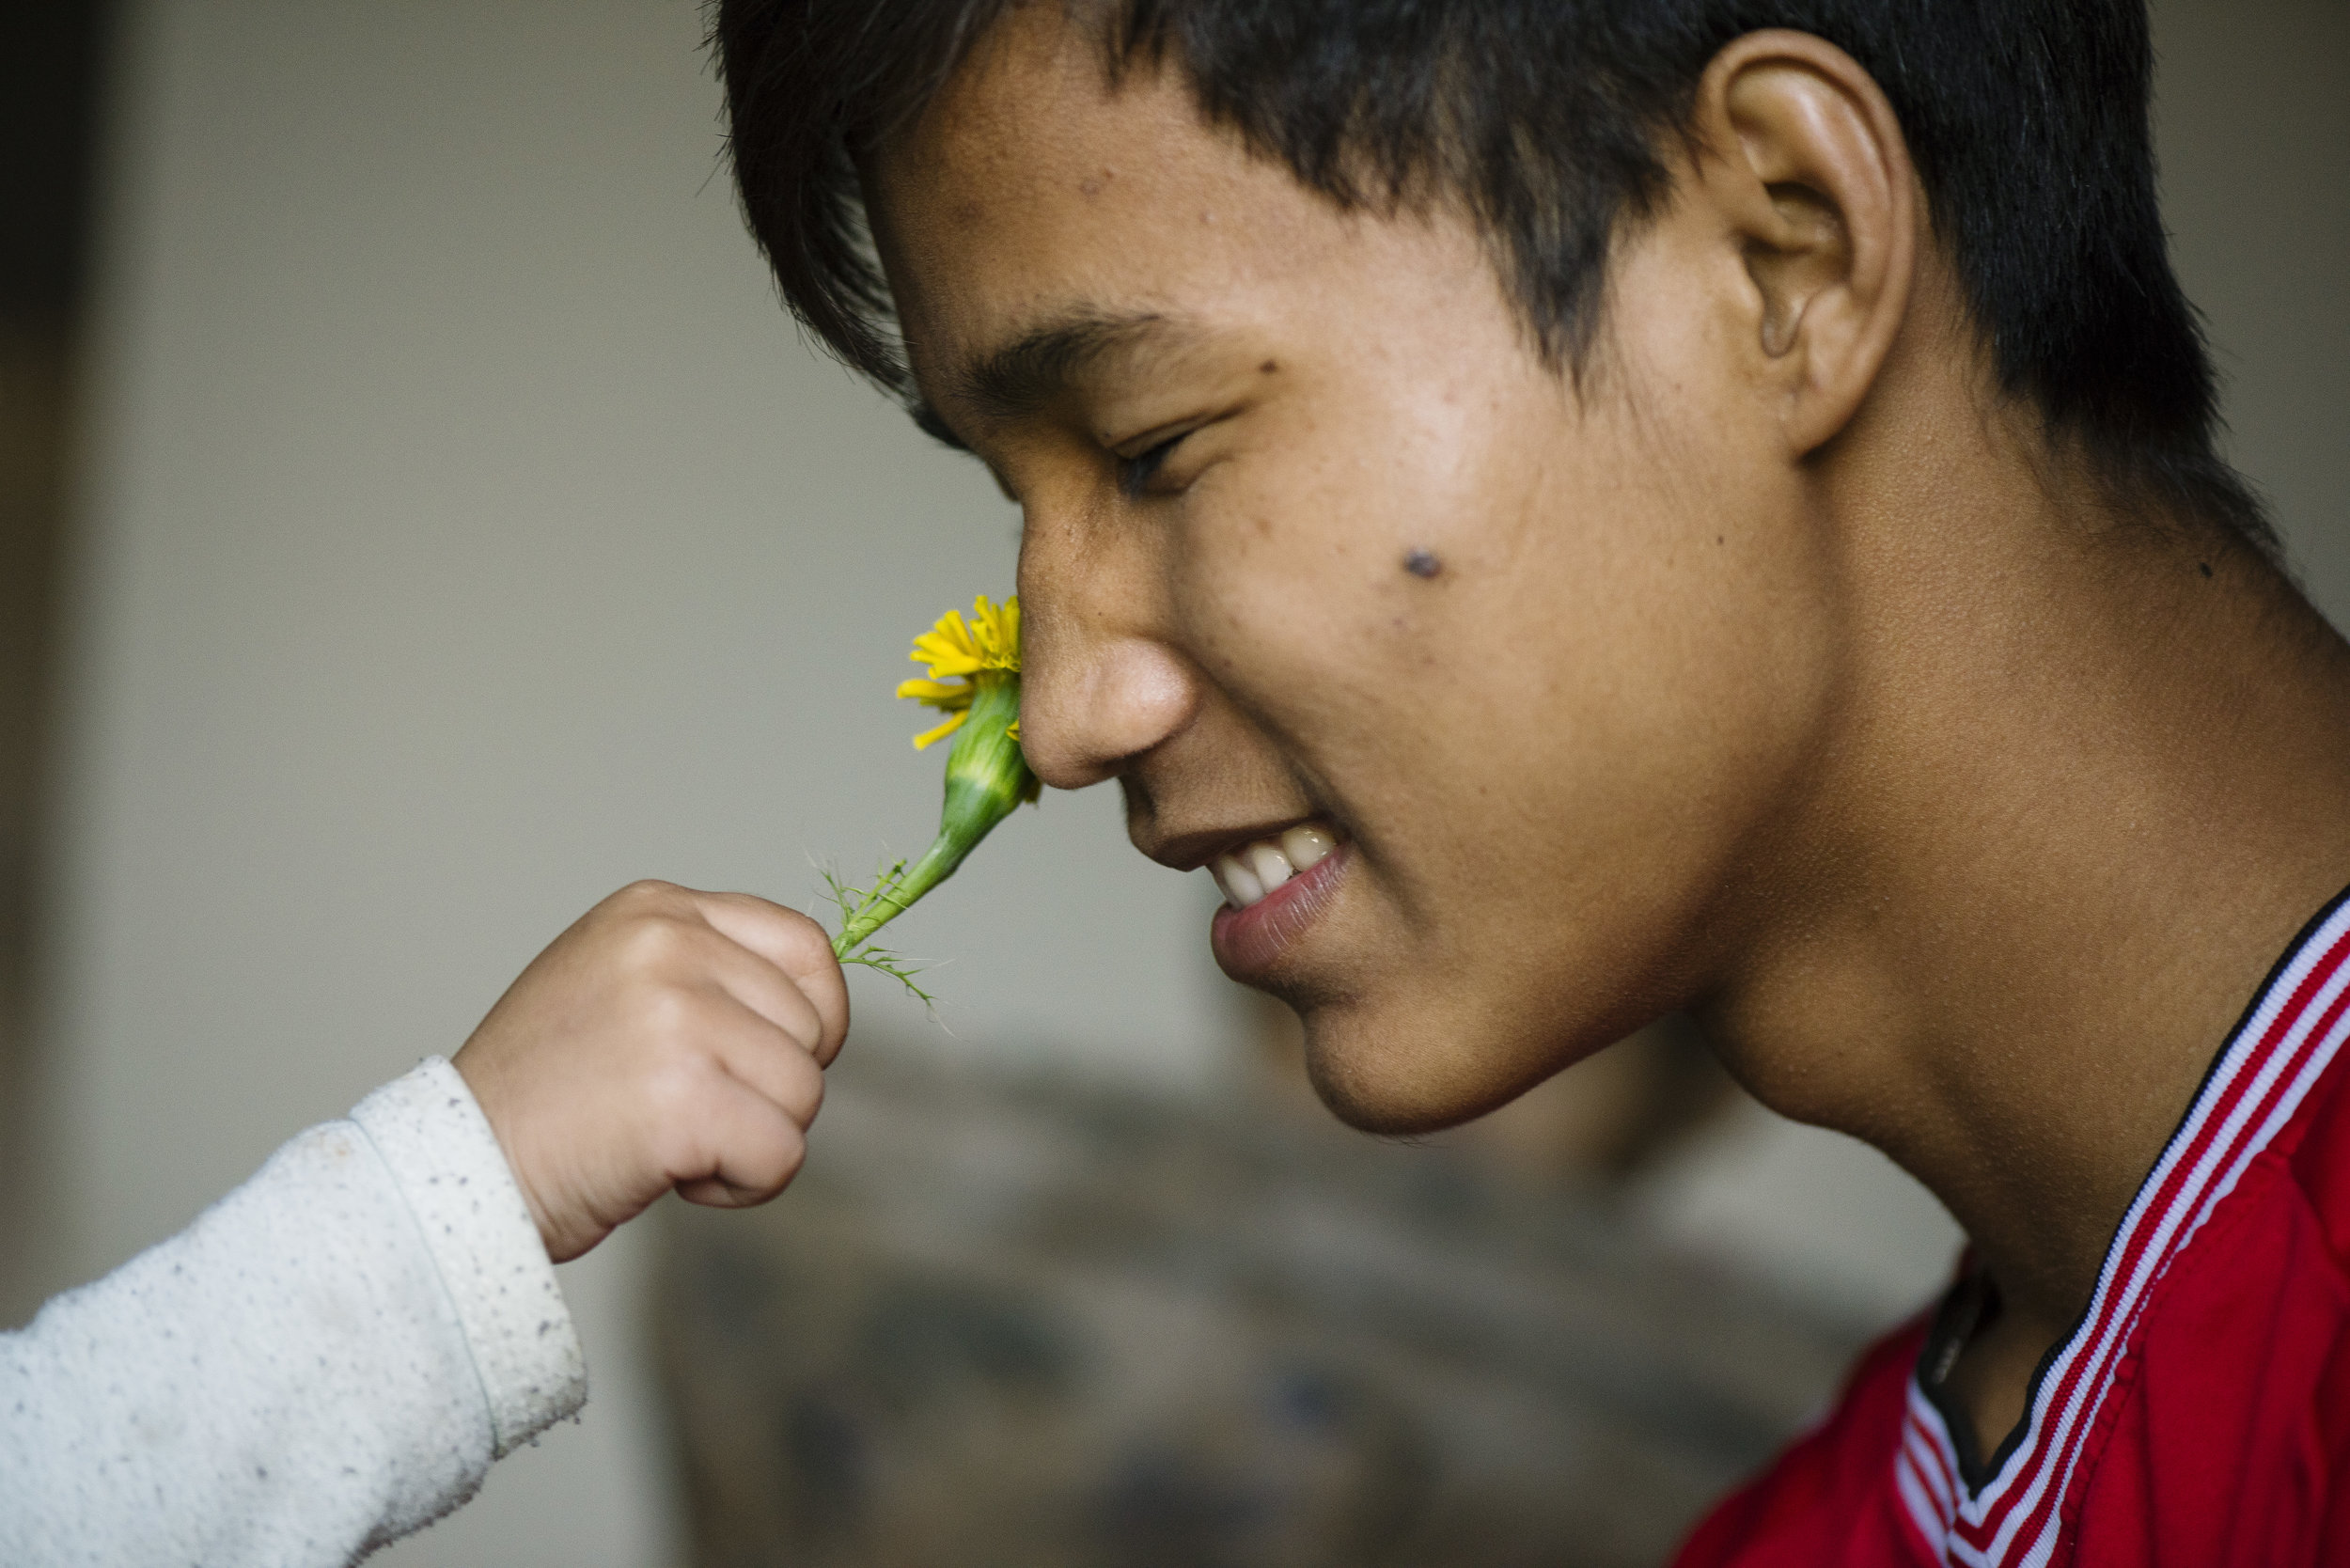  The youngest daughter in the family, Nga Meh, 2, puts a flower up to her brother Soe Reh's nose and asks him to smell it. He obliges, tucking it behind his ear. 